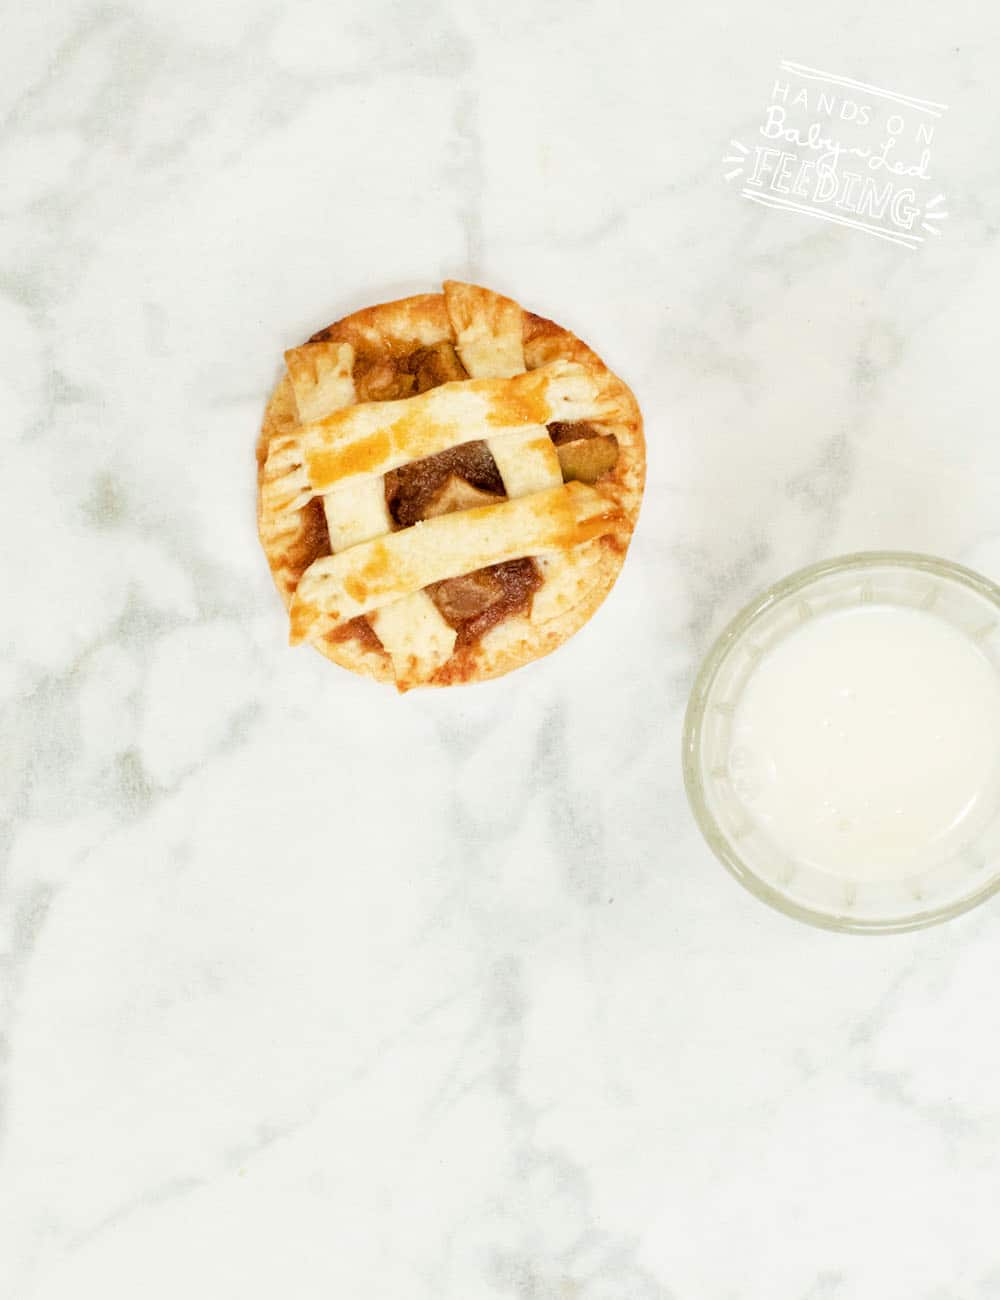 Fresh apple pie COOKIES! Homemade sweet apple filling with a light and crispy crust.The perfect finger food for baby and toddler hands. Refined sugar free treat that is perfect for baby led weaning snack! #babyledweaning #cookies #applepie #refinedsugarfree